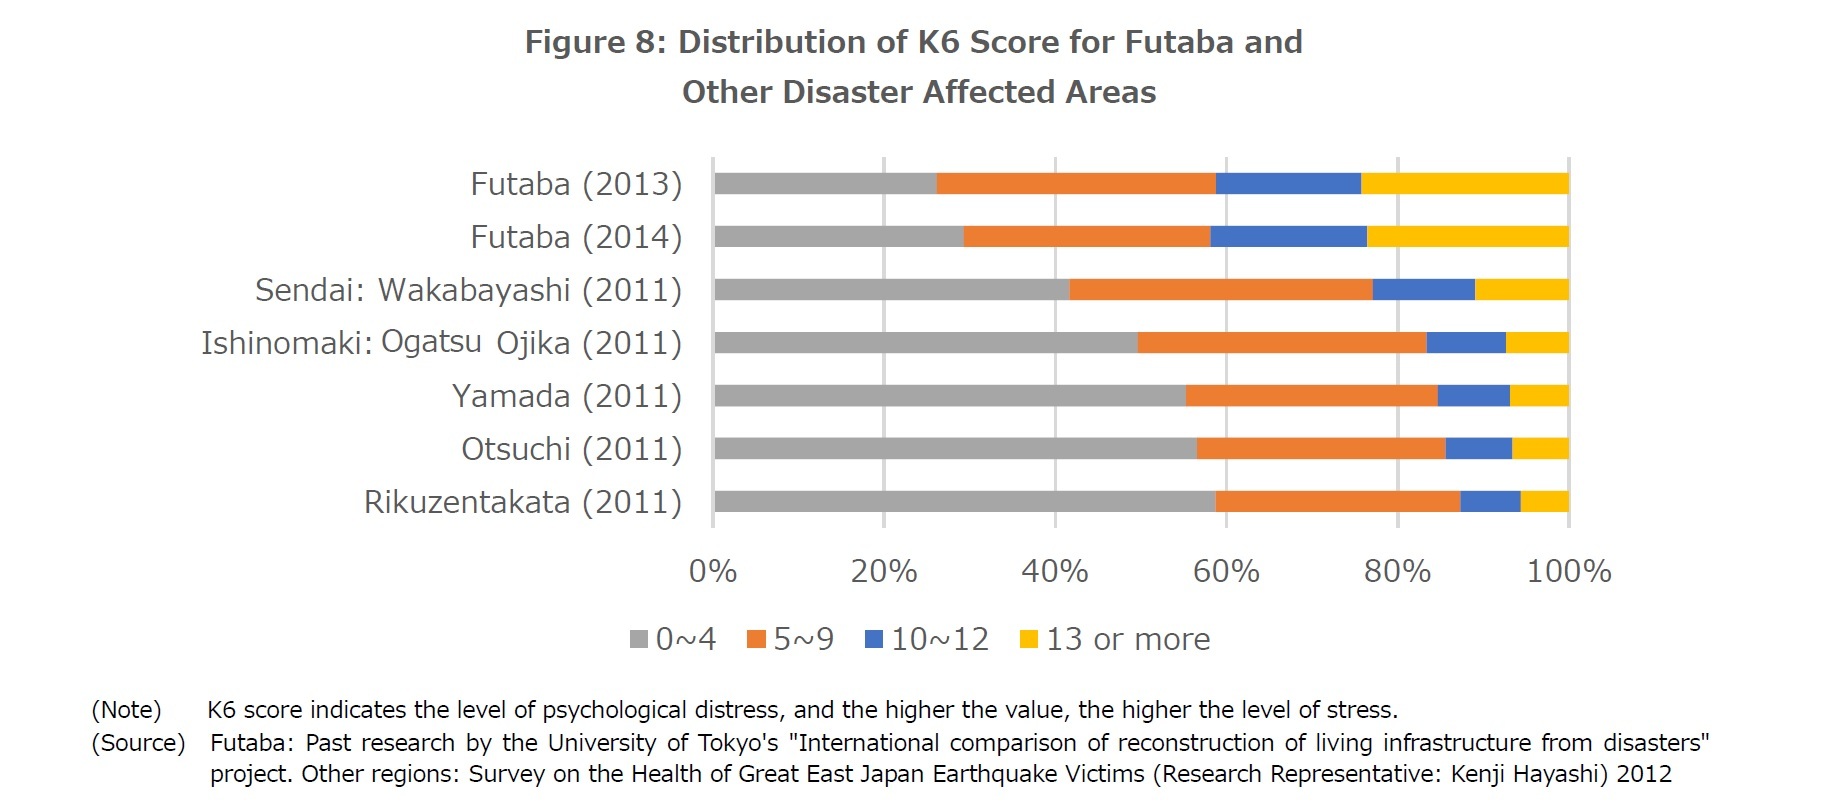 Figure 8: Distribution of K6 Score for Futaba and Other Disaster Affected Areas